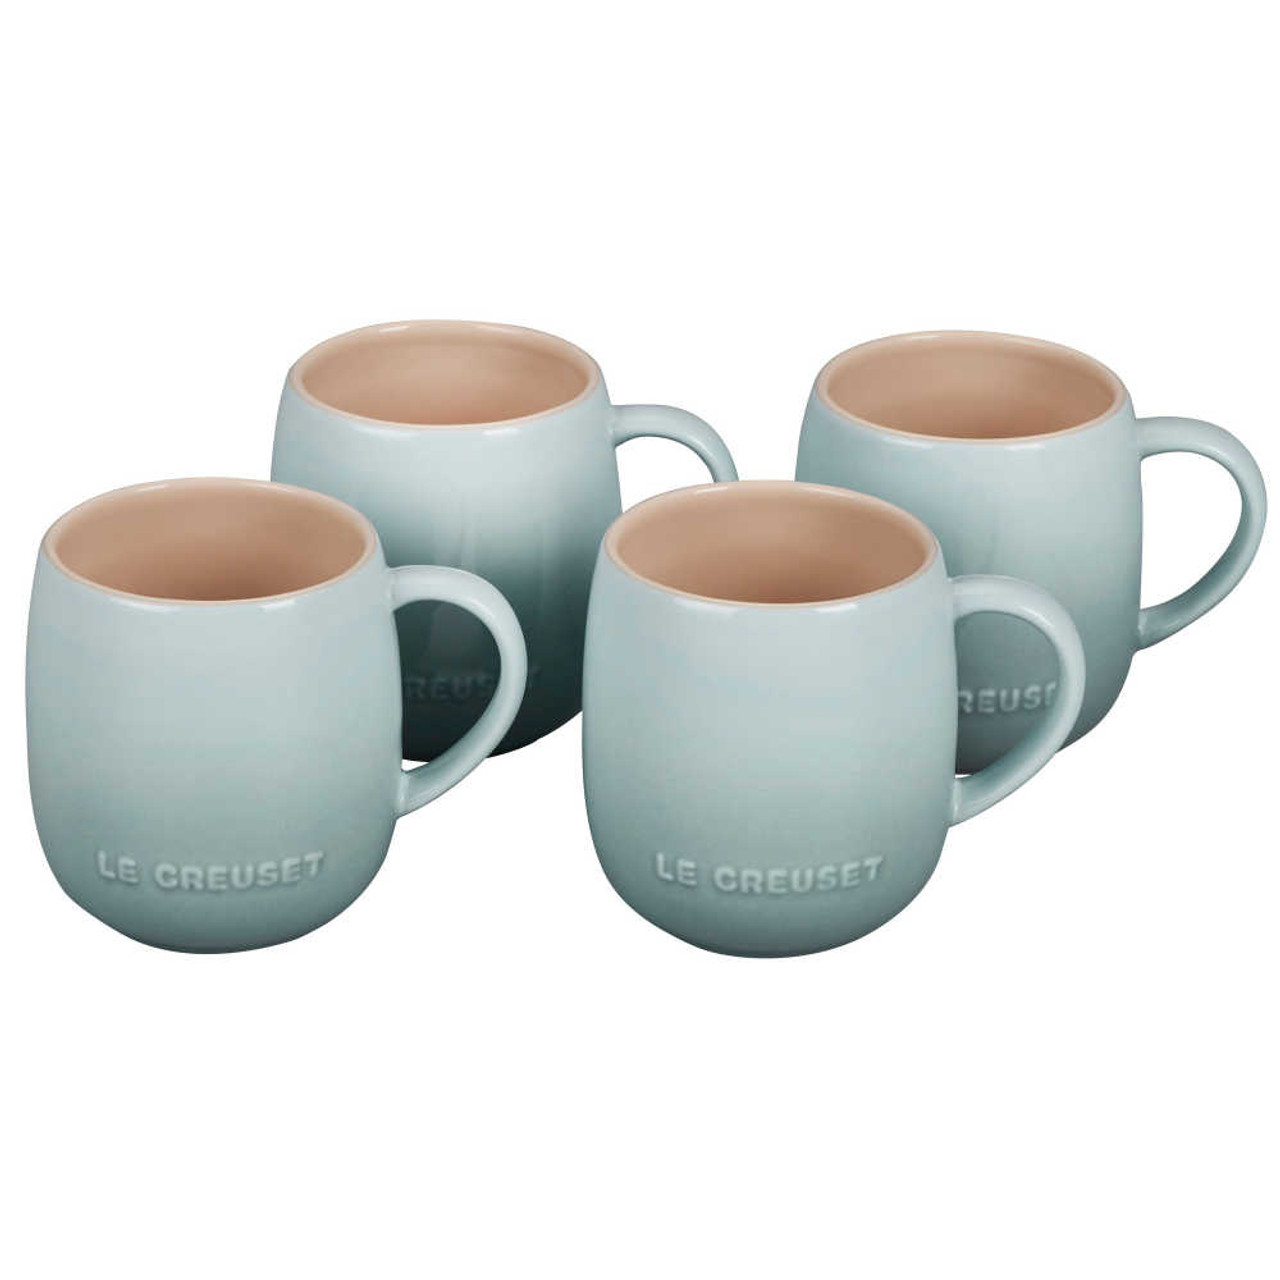 https://cdn11.bigcommerce.com/s-hccytny0od/images/stencil/1280x1280/products/4973/21166/Le_Creuset_Heritage_Mugs_in_Sea_Salt__19457.1661952518.jpg?c=2?imbypass=on